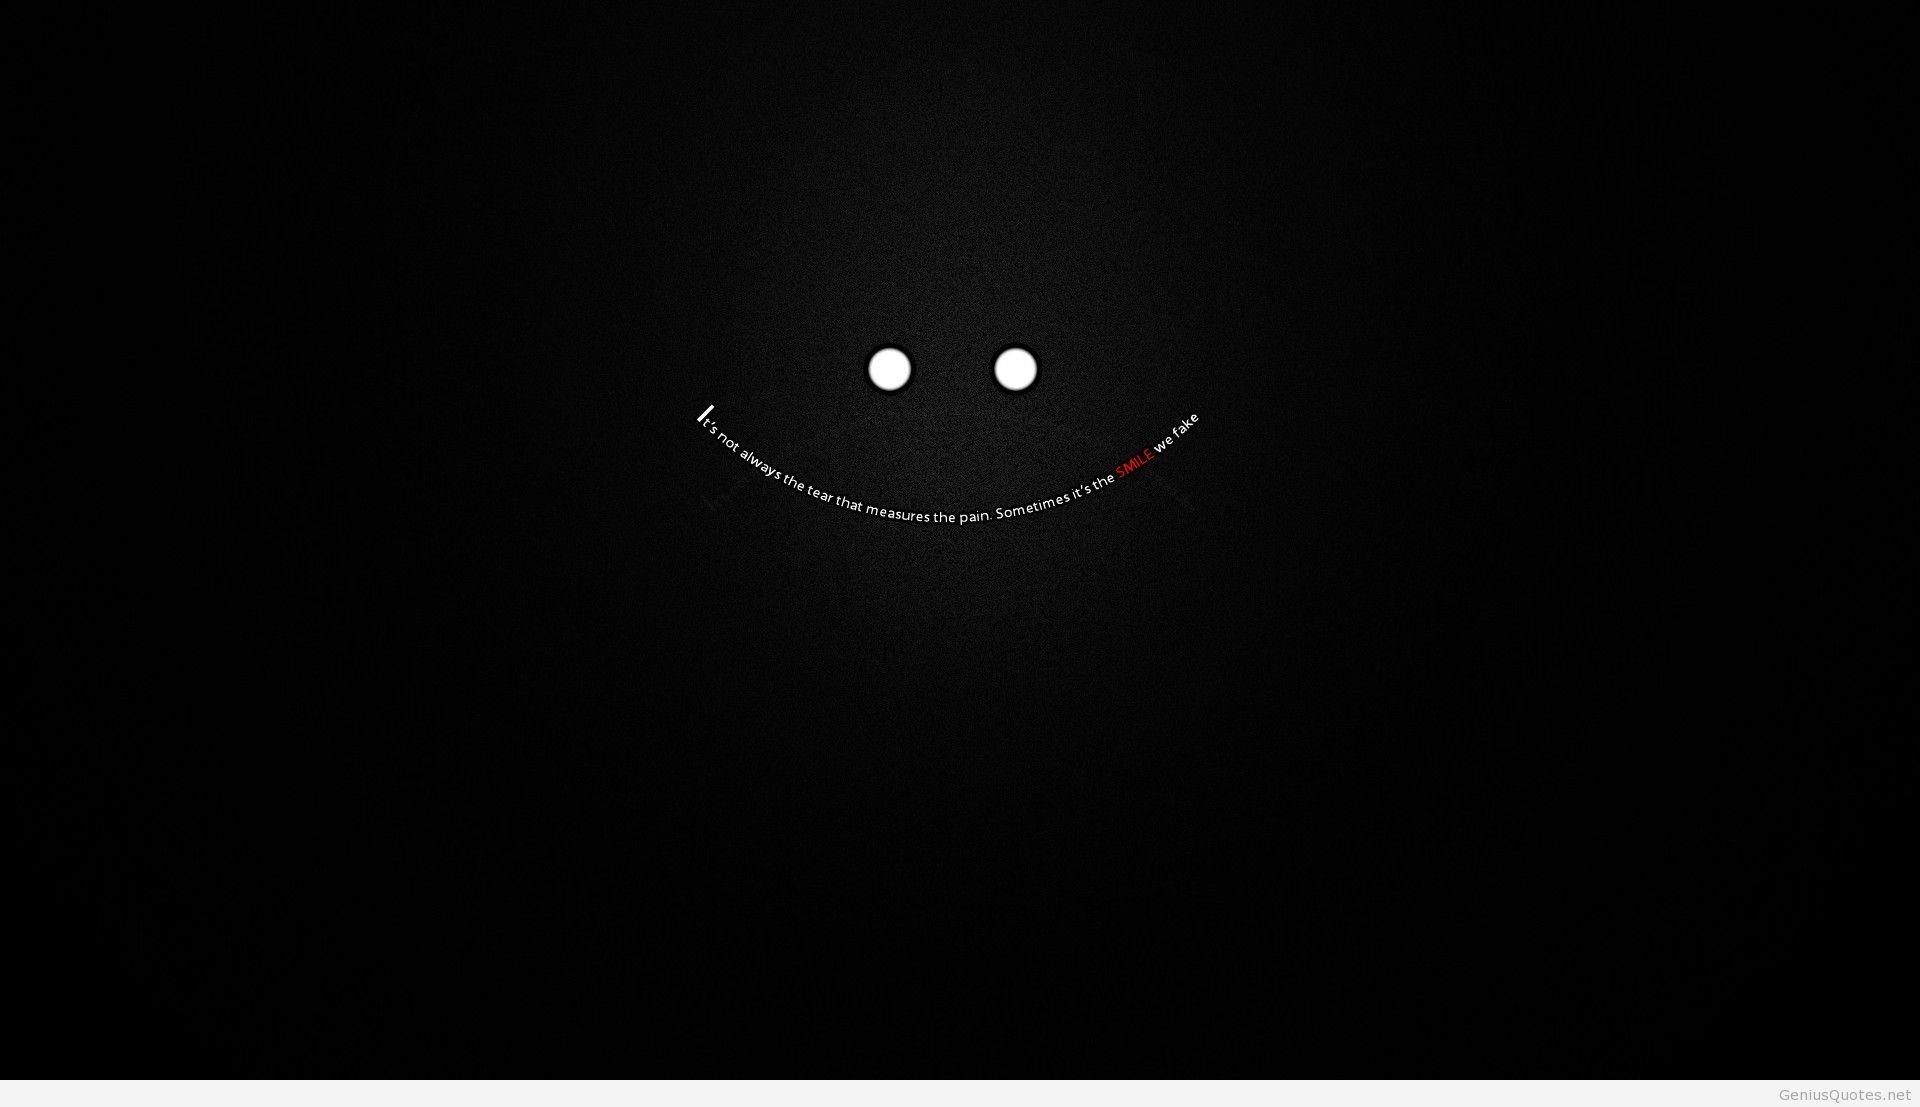 Smile wallpaper with hidden quote